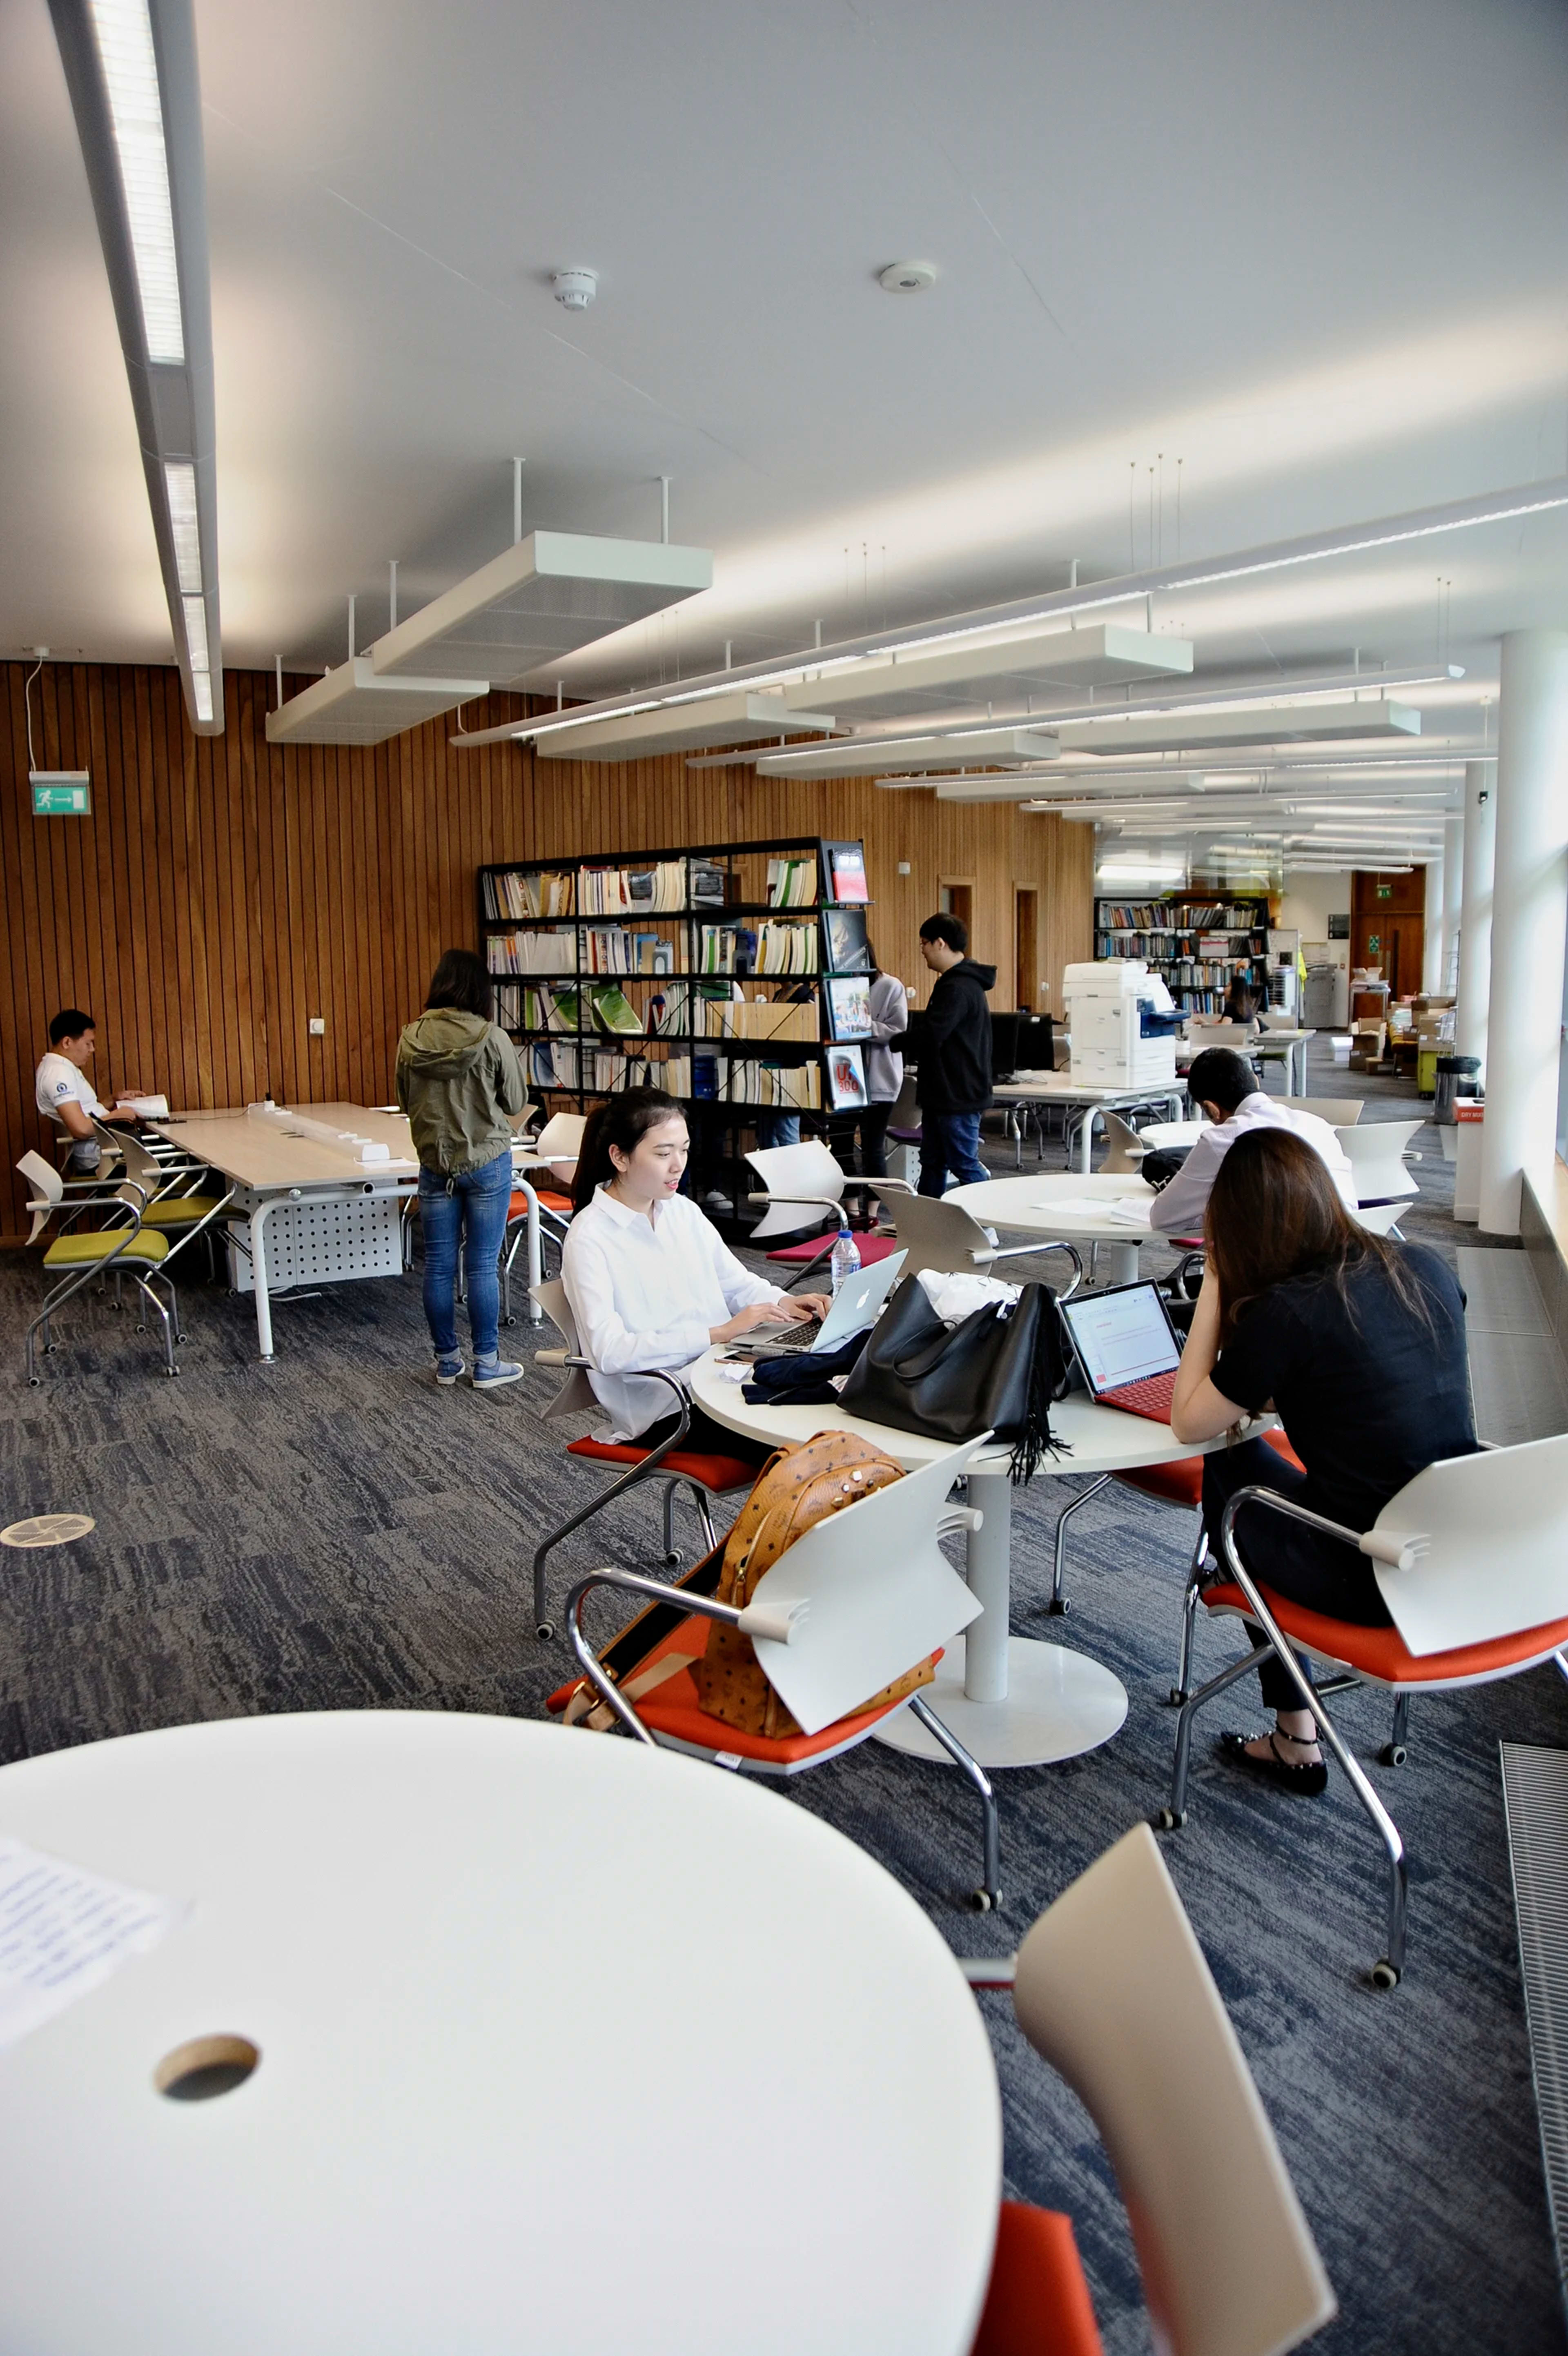 Learning Resource Centre with international students working